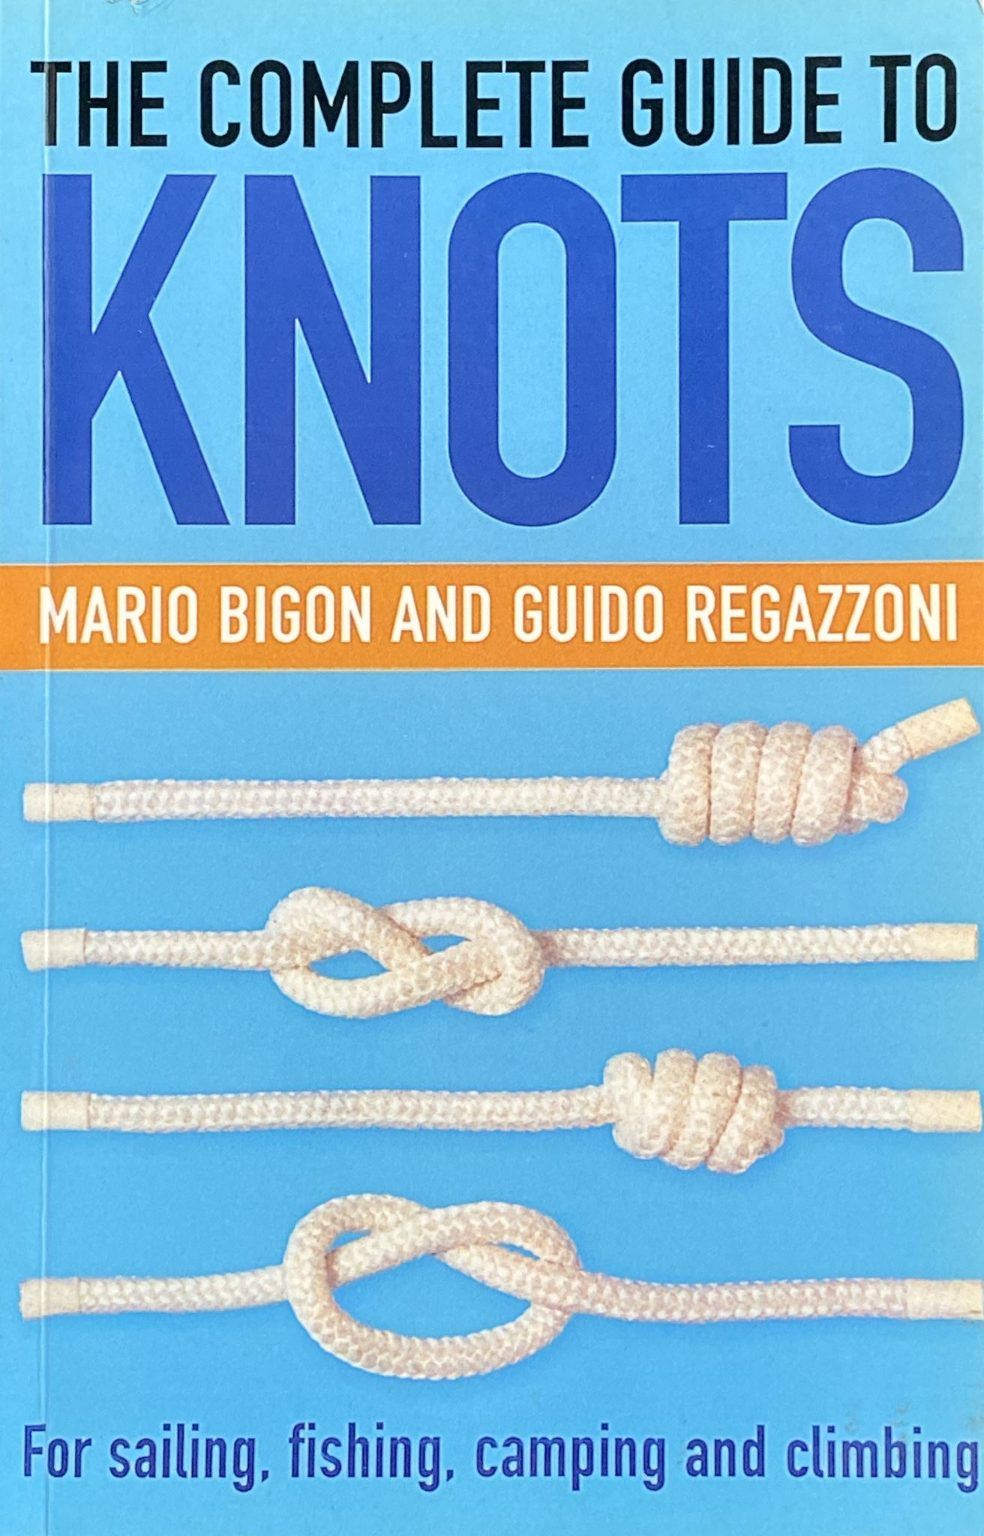 KNOTS: The Complete Guide to